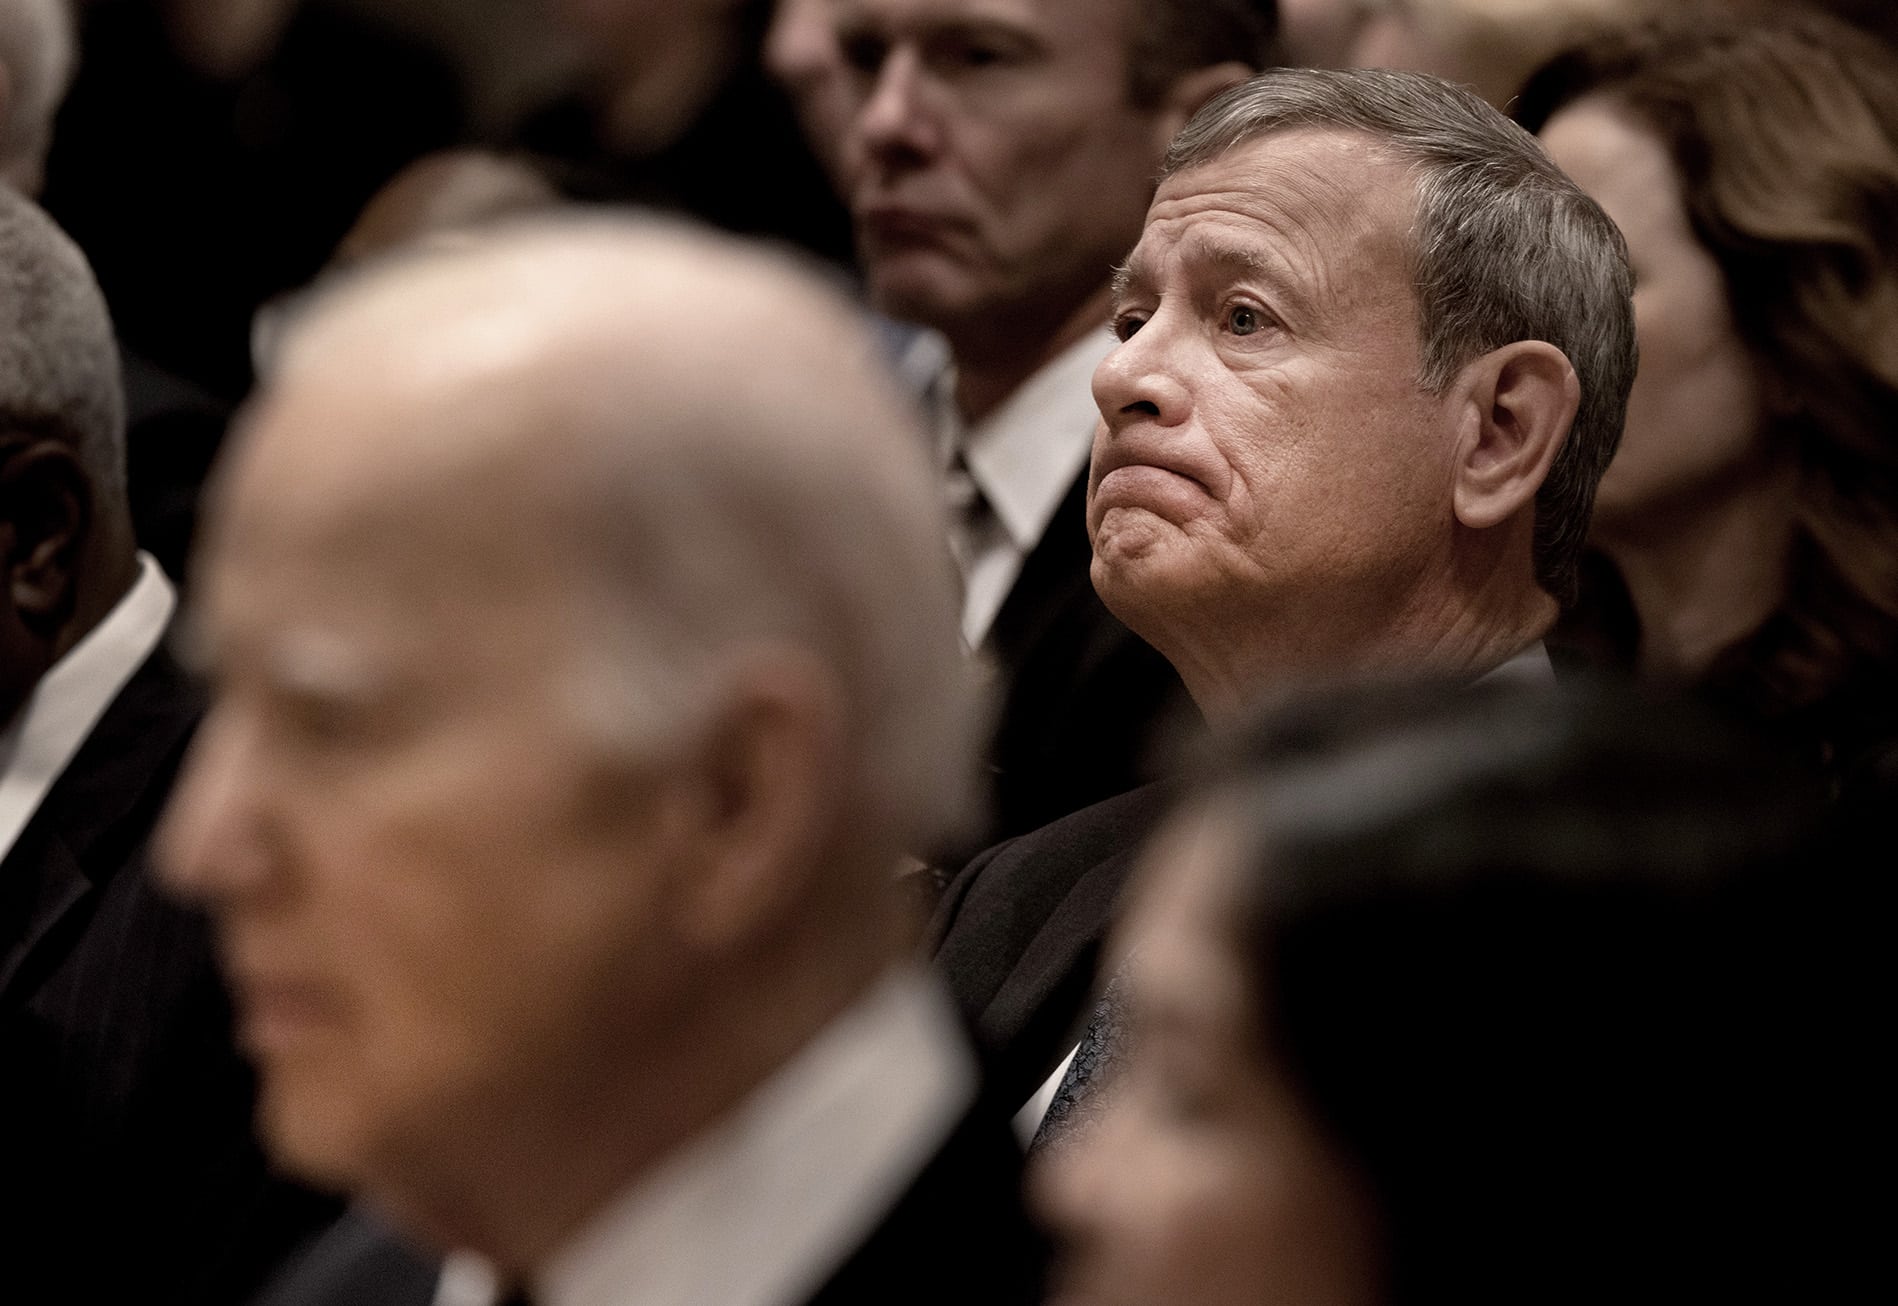 Chief Justice John Roberts and President Biden after they eulogized Justice O’Connor at the National Cathedral